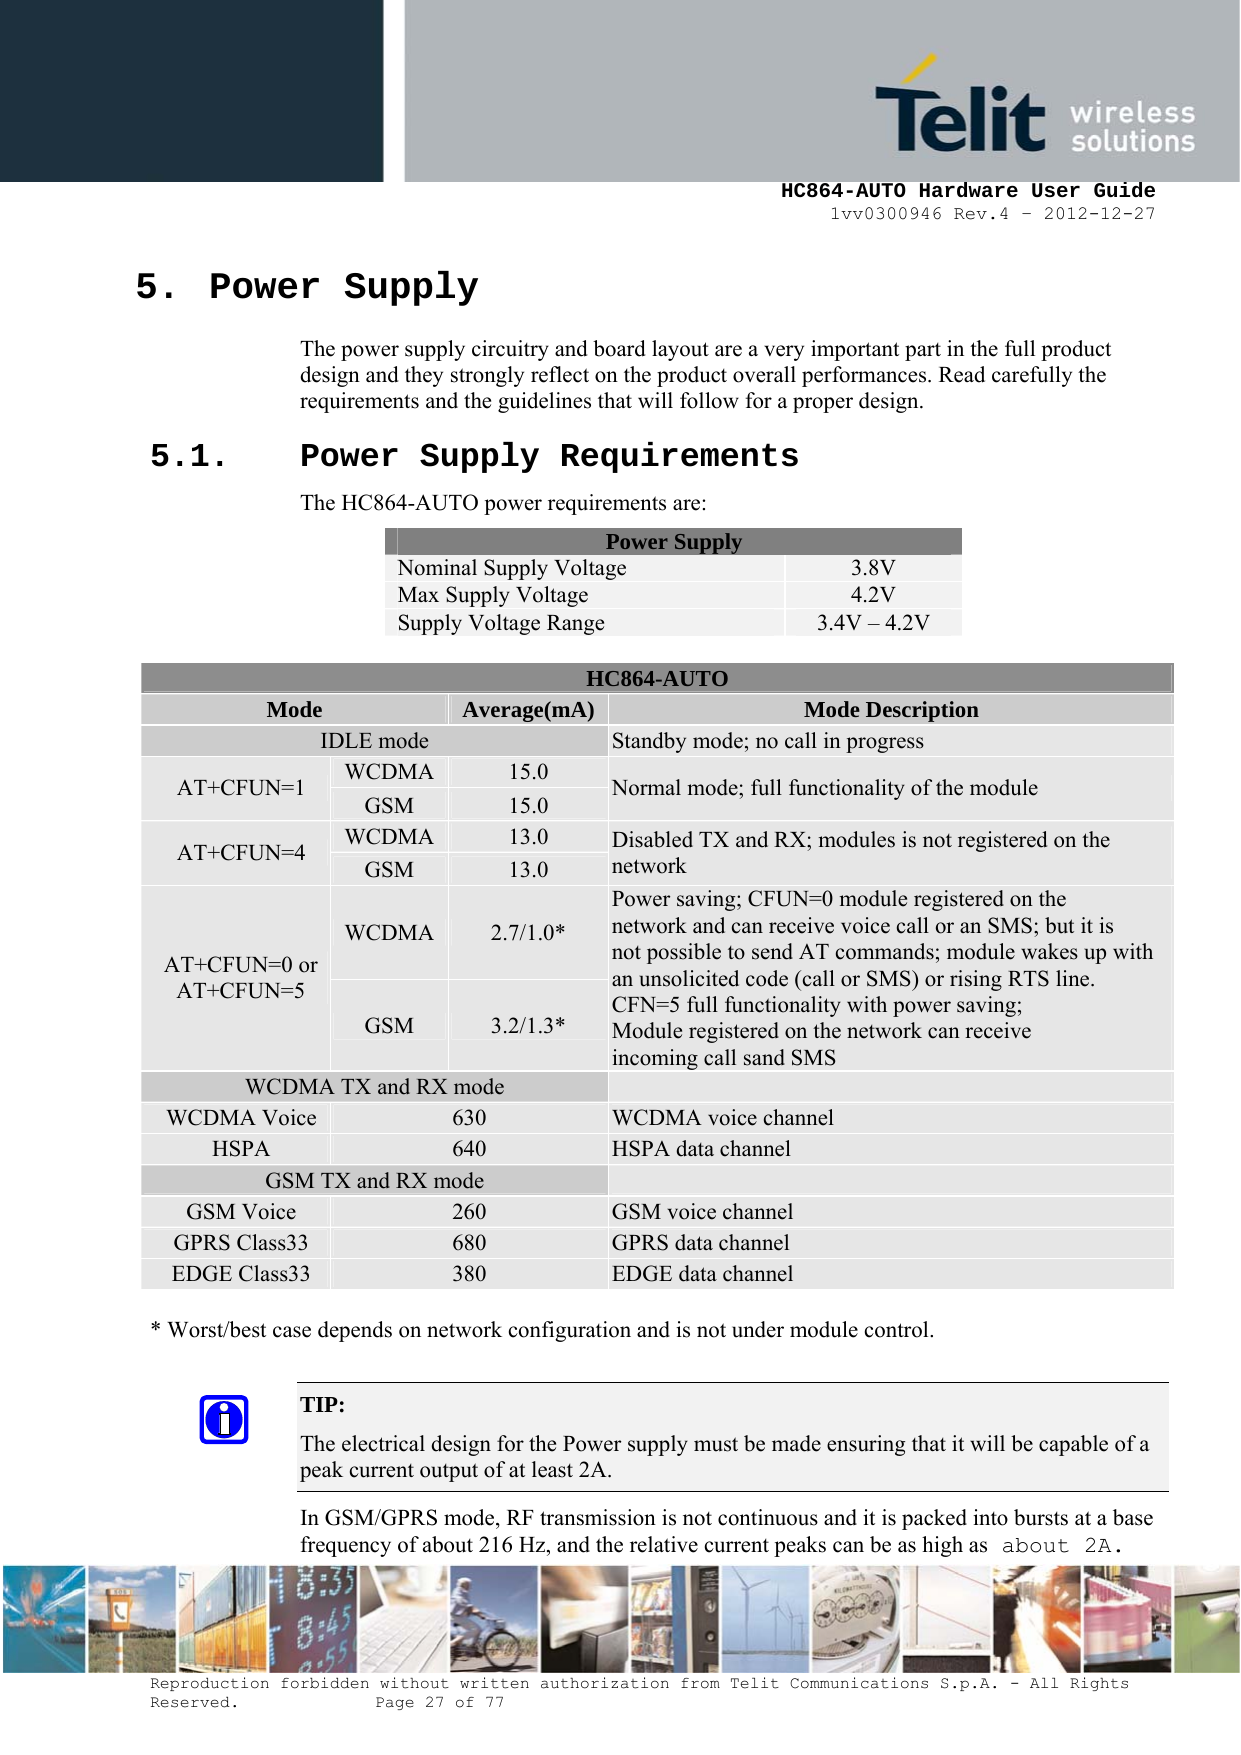     HC864-AUTO Hardware User Guide 1vv0300946 Rev.4 – 2012-12-27 Reproduction forbidden without written authorization from Telit Communications S.p.A. - All Rights Reserved.    Page 27 of 77  5. Power Supply The power supply circuitry and board layout are a very important part in the full product design and they strongly reflect on the product overall performances. Read carefully the requirements and the guidelines that will follow for a proper design. 5.1. Power Supply Requirements The HC864-AUTO power requirements are: Power Supply Nominal Supply Voltage  3.8V Max Supply Voltage  4.2V Supply Voltage Range  3.4V – 4.2V  HC864-AUTO  Mode  Average(mA) Mode Description IDLE mode  Standby mode; no call in progress WCDMA  15.0 AT+CFUN=1  GSM  15.0  Normal mode; full functionality of the module WCDMA  13.0 AT+CFUN=4  GSM  13.0 Disabled TX and RX; modules is not registered on the network WCDMA  2.7/1.0* AT+CFUN=0 or AT+CFUN=5 GSM  3.2/1.3* Power saving; CFUN=0 module registered on the network and can receive voice call or an SMS; but it is not possible to send AT commands; module wakes up with an unsolicited code (call or SMS) or rising RTS line. CFN=5 full functionality with power saving; Module registered on the network can receive  incoming call sand SMS WCDMA TX and RX mode   WCDMA Voice  630  WCDMA voice channel HSPA  640  HSPA data channel  GSM TX and RX mode   GSM Voice  260  GSM voice channel GPRS Class33  680  GPRS data channel EDGE Class33  380  EDGE data channel  * Worst/best case depends on network configuration and is not under module control.  TIP:  The electrical design for the Power supply must be made ensuring that it will be capable of a peak current output of at least 2A. In GSM/GPRS mode, RF transmission is not continuous and it is packed into bursts at a base frequency of about 216 Hz, and the relative current peaks can be as high as about 2A. 